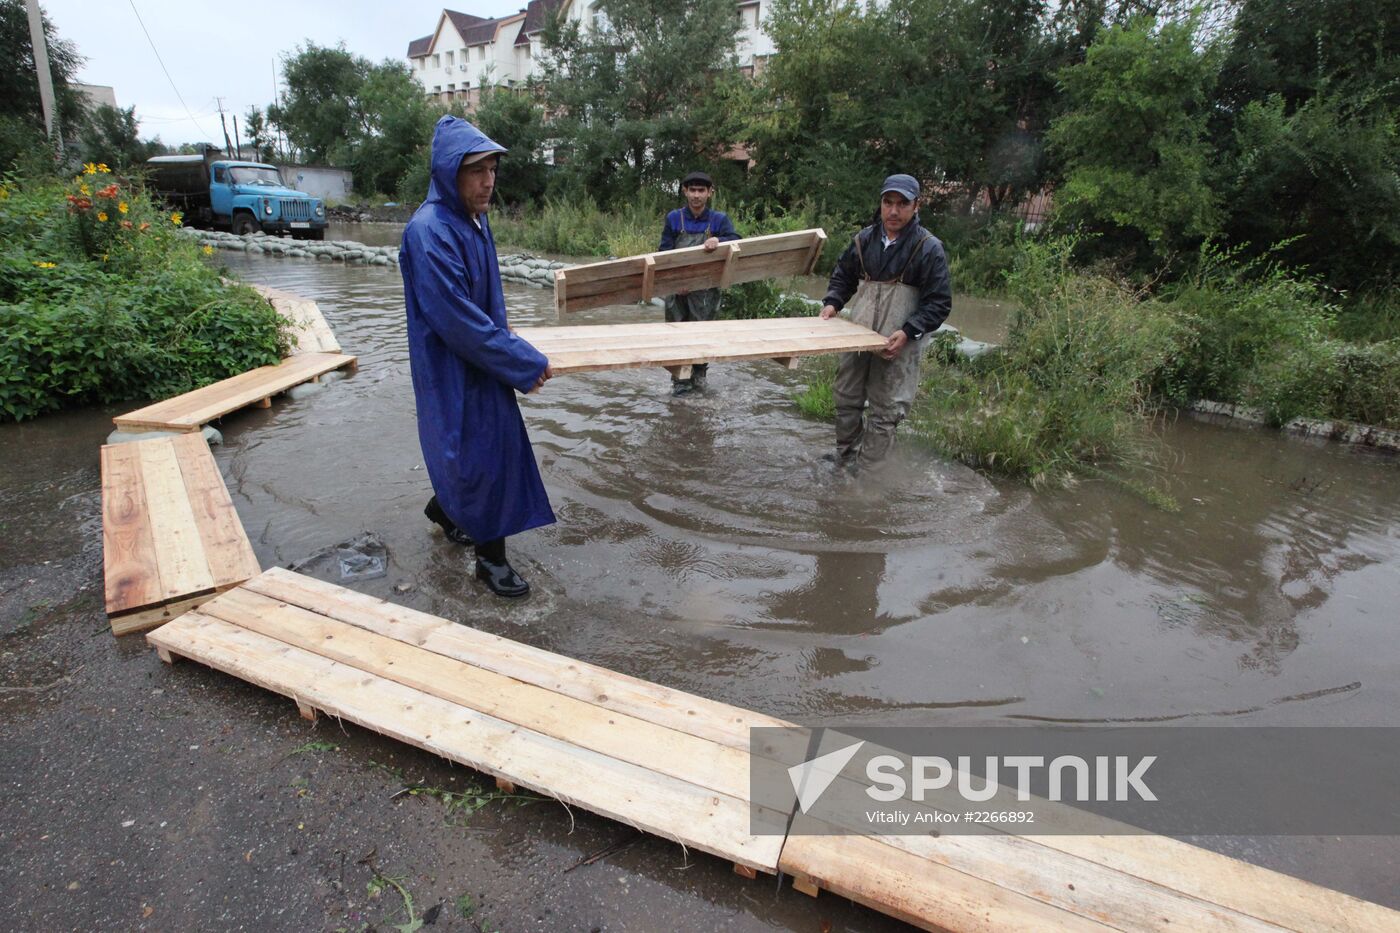 Flood situation in Khabarovsk